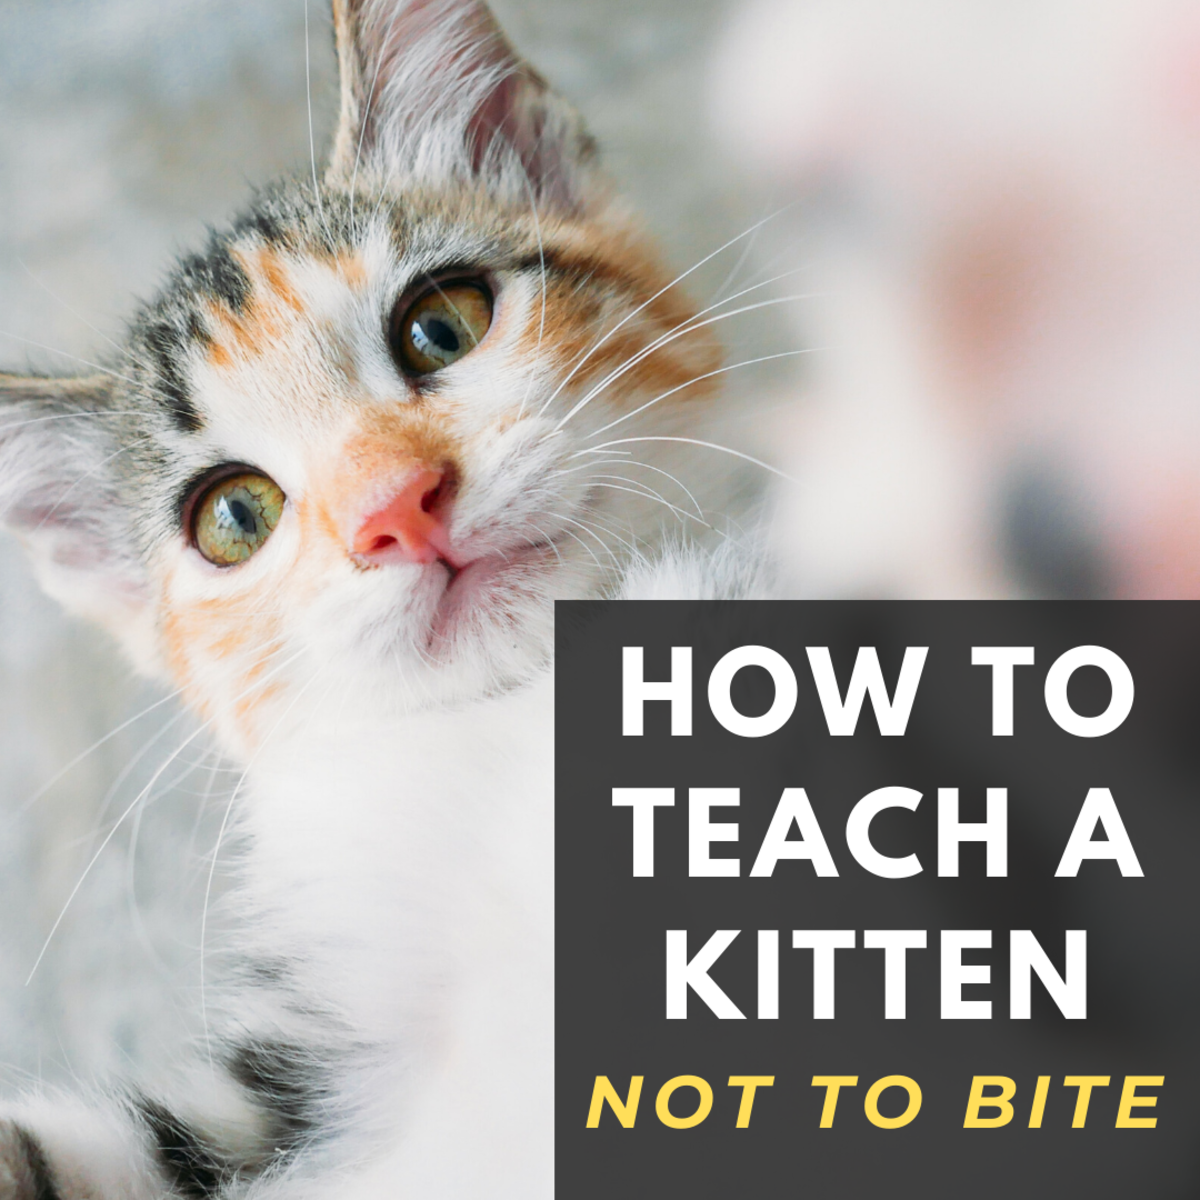 Why Does My Kitten Bite Me? PetHelpful